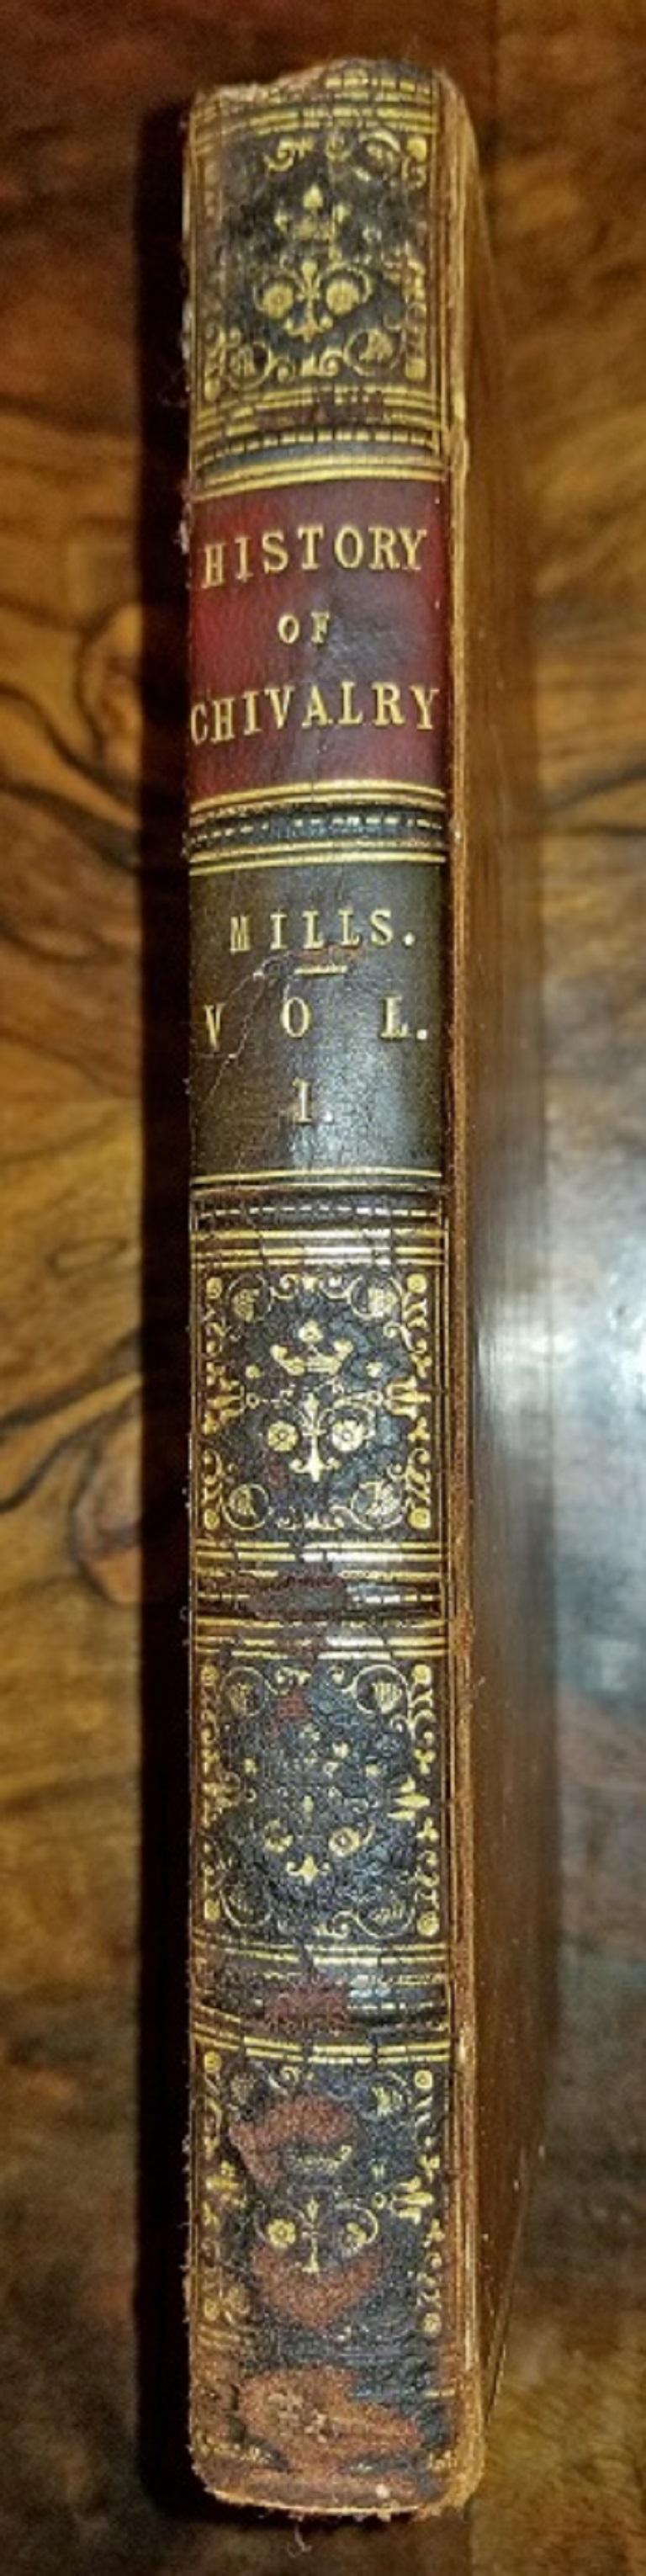 History of Chivalry in 2 Vols by Charles Mills 1825 In Fair Condition In Dallas, TX